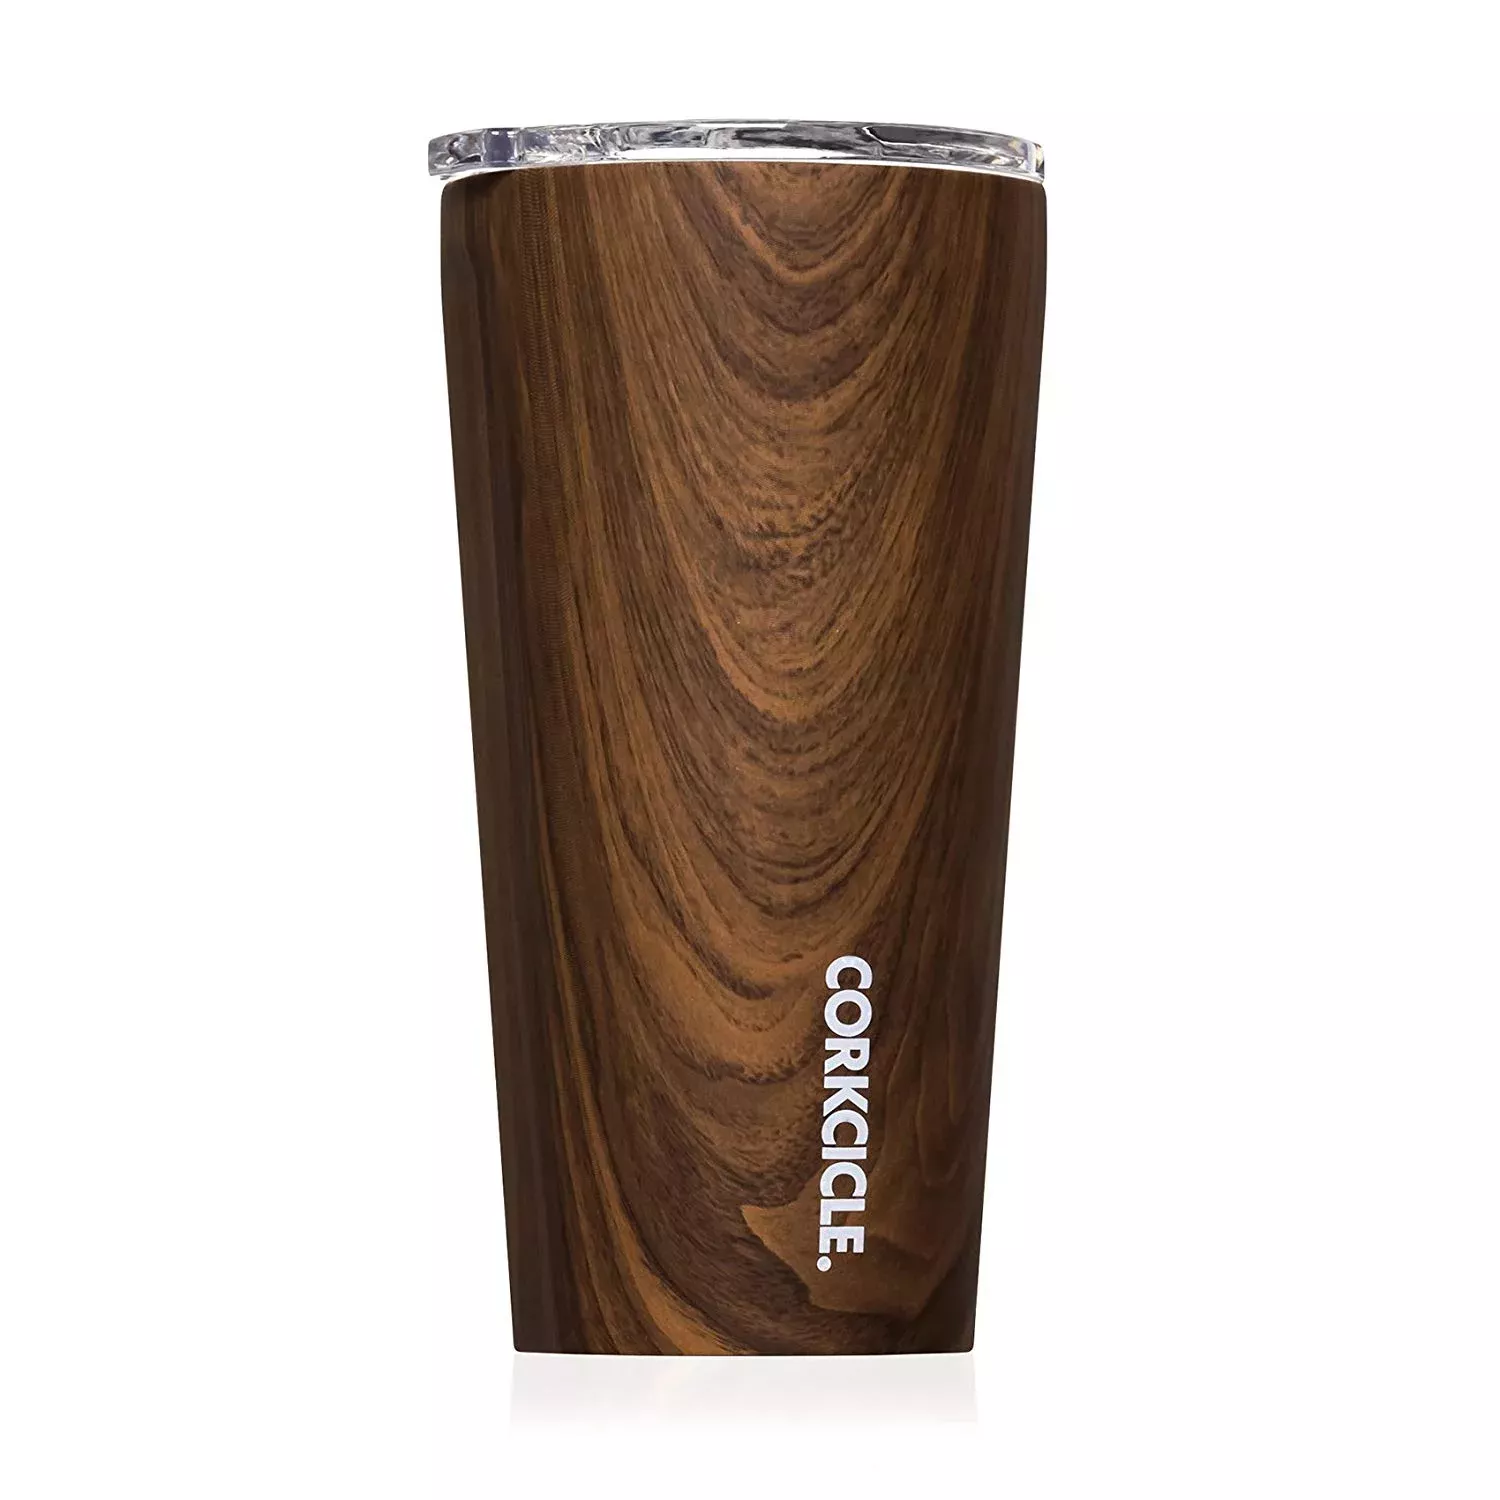 Best Coworker Gifts 2023: Corkcicle Walnut Wood Travel Tumbler for Boss 2023